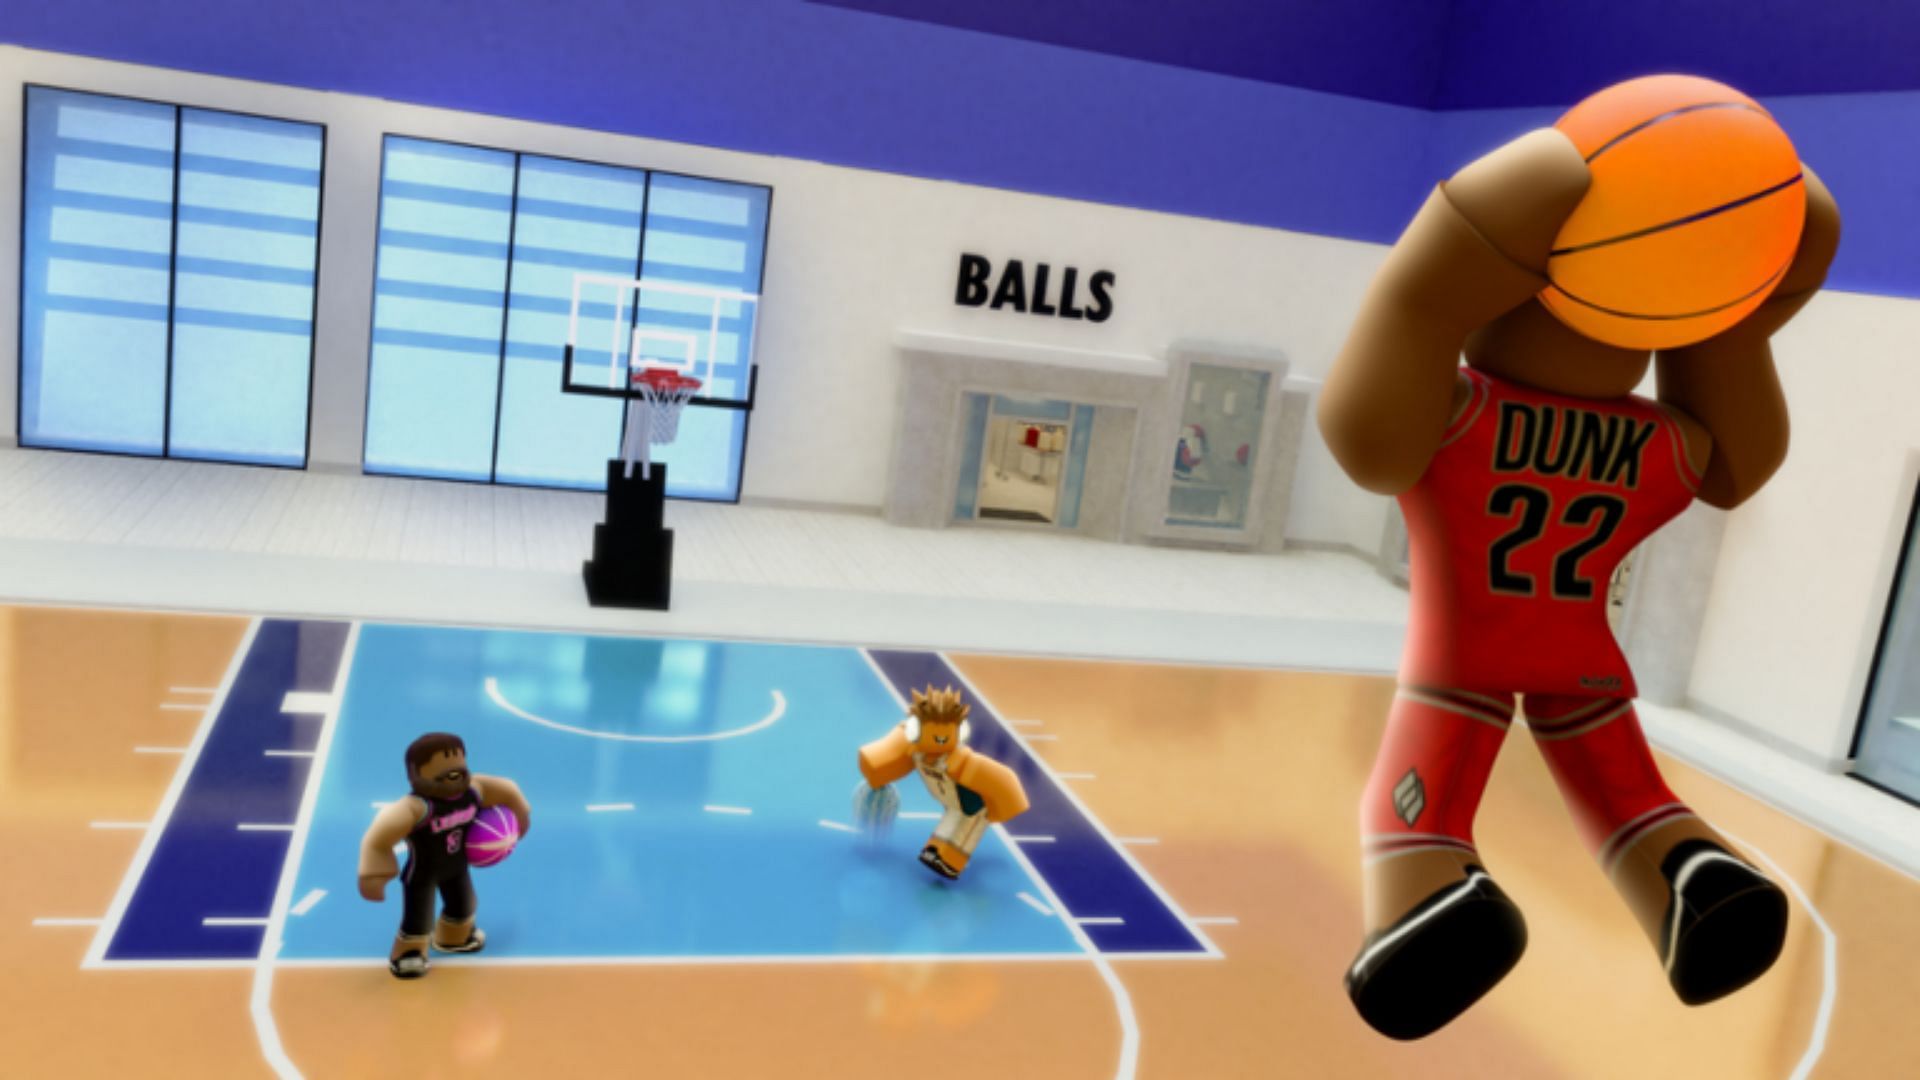 Codes for Dunking Simulator and their importance (Image via Roblox)